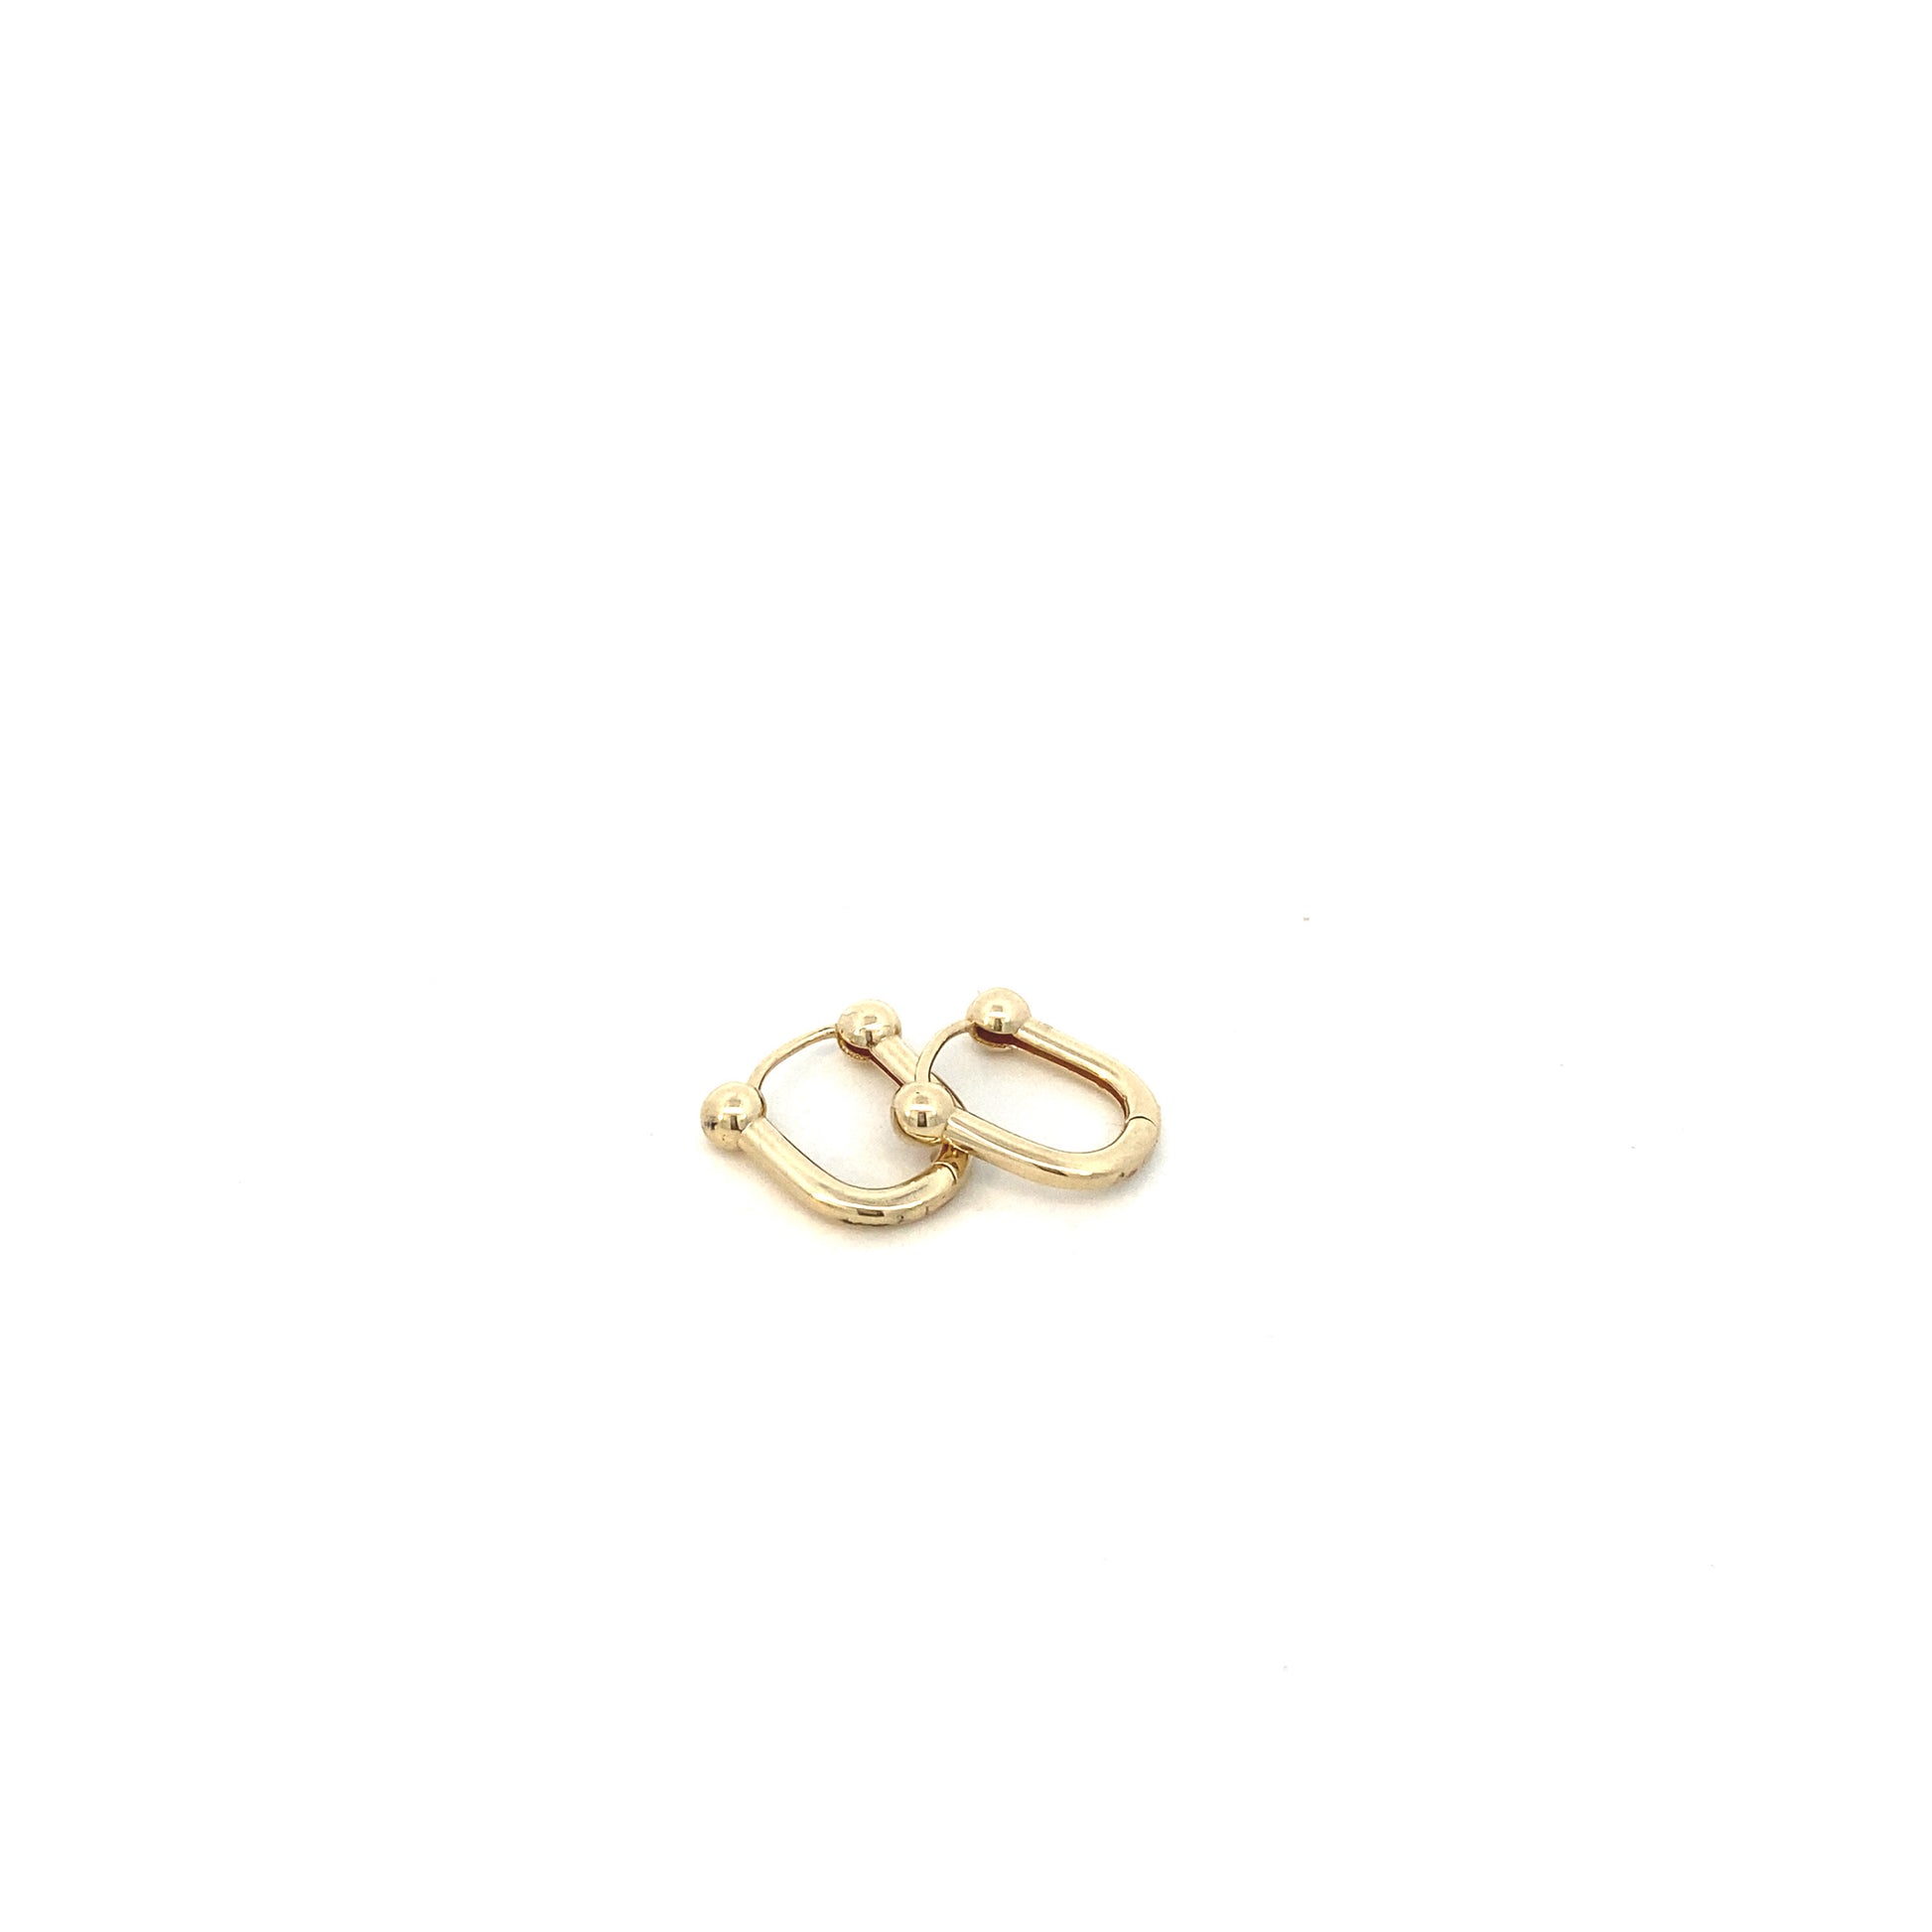 14K Gold Fancy Hoops Earrings | Luby Gold Collection | Luby 